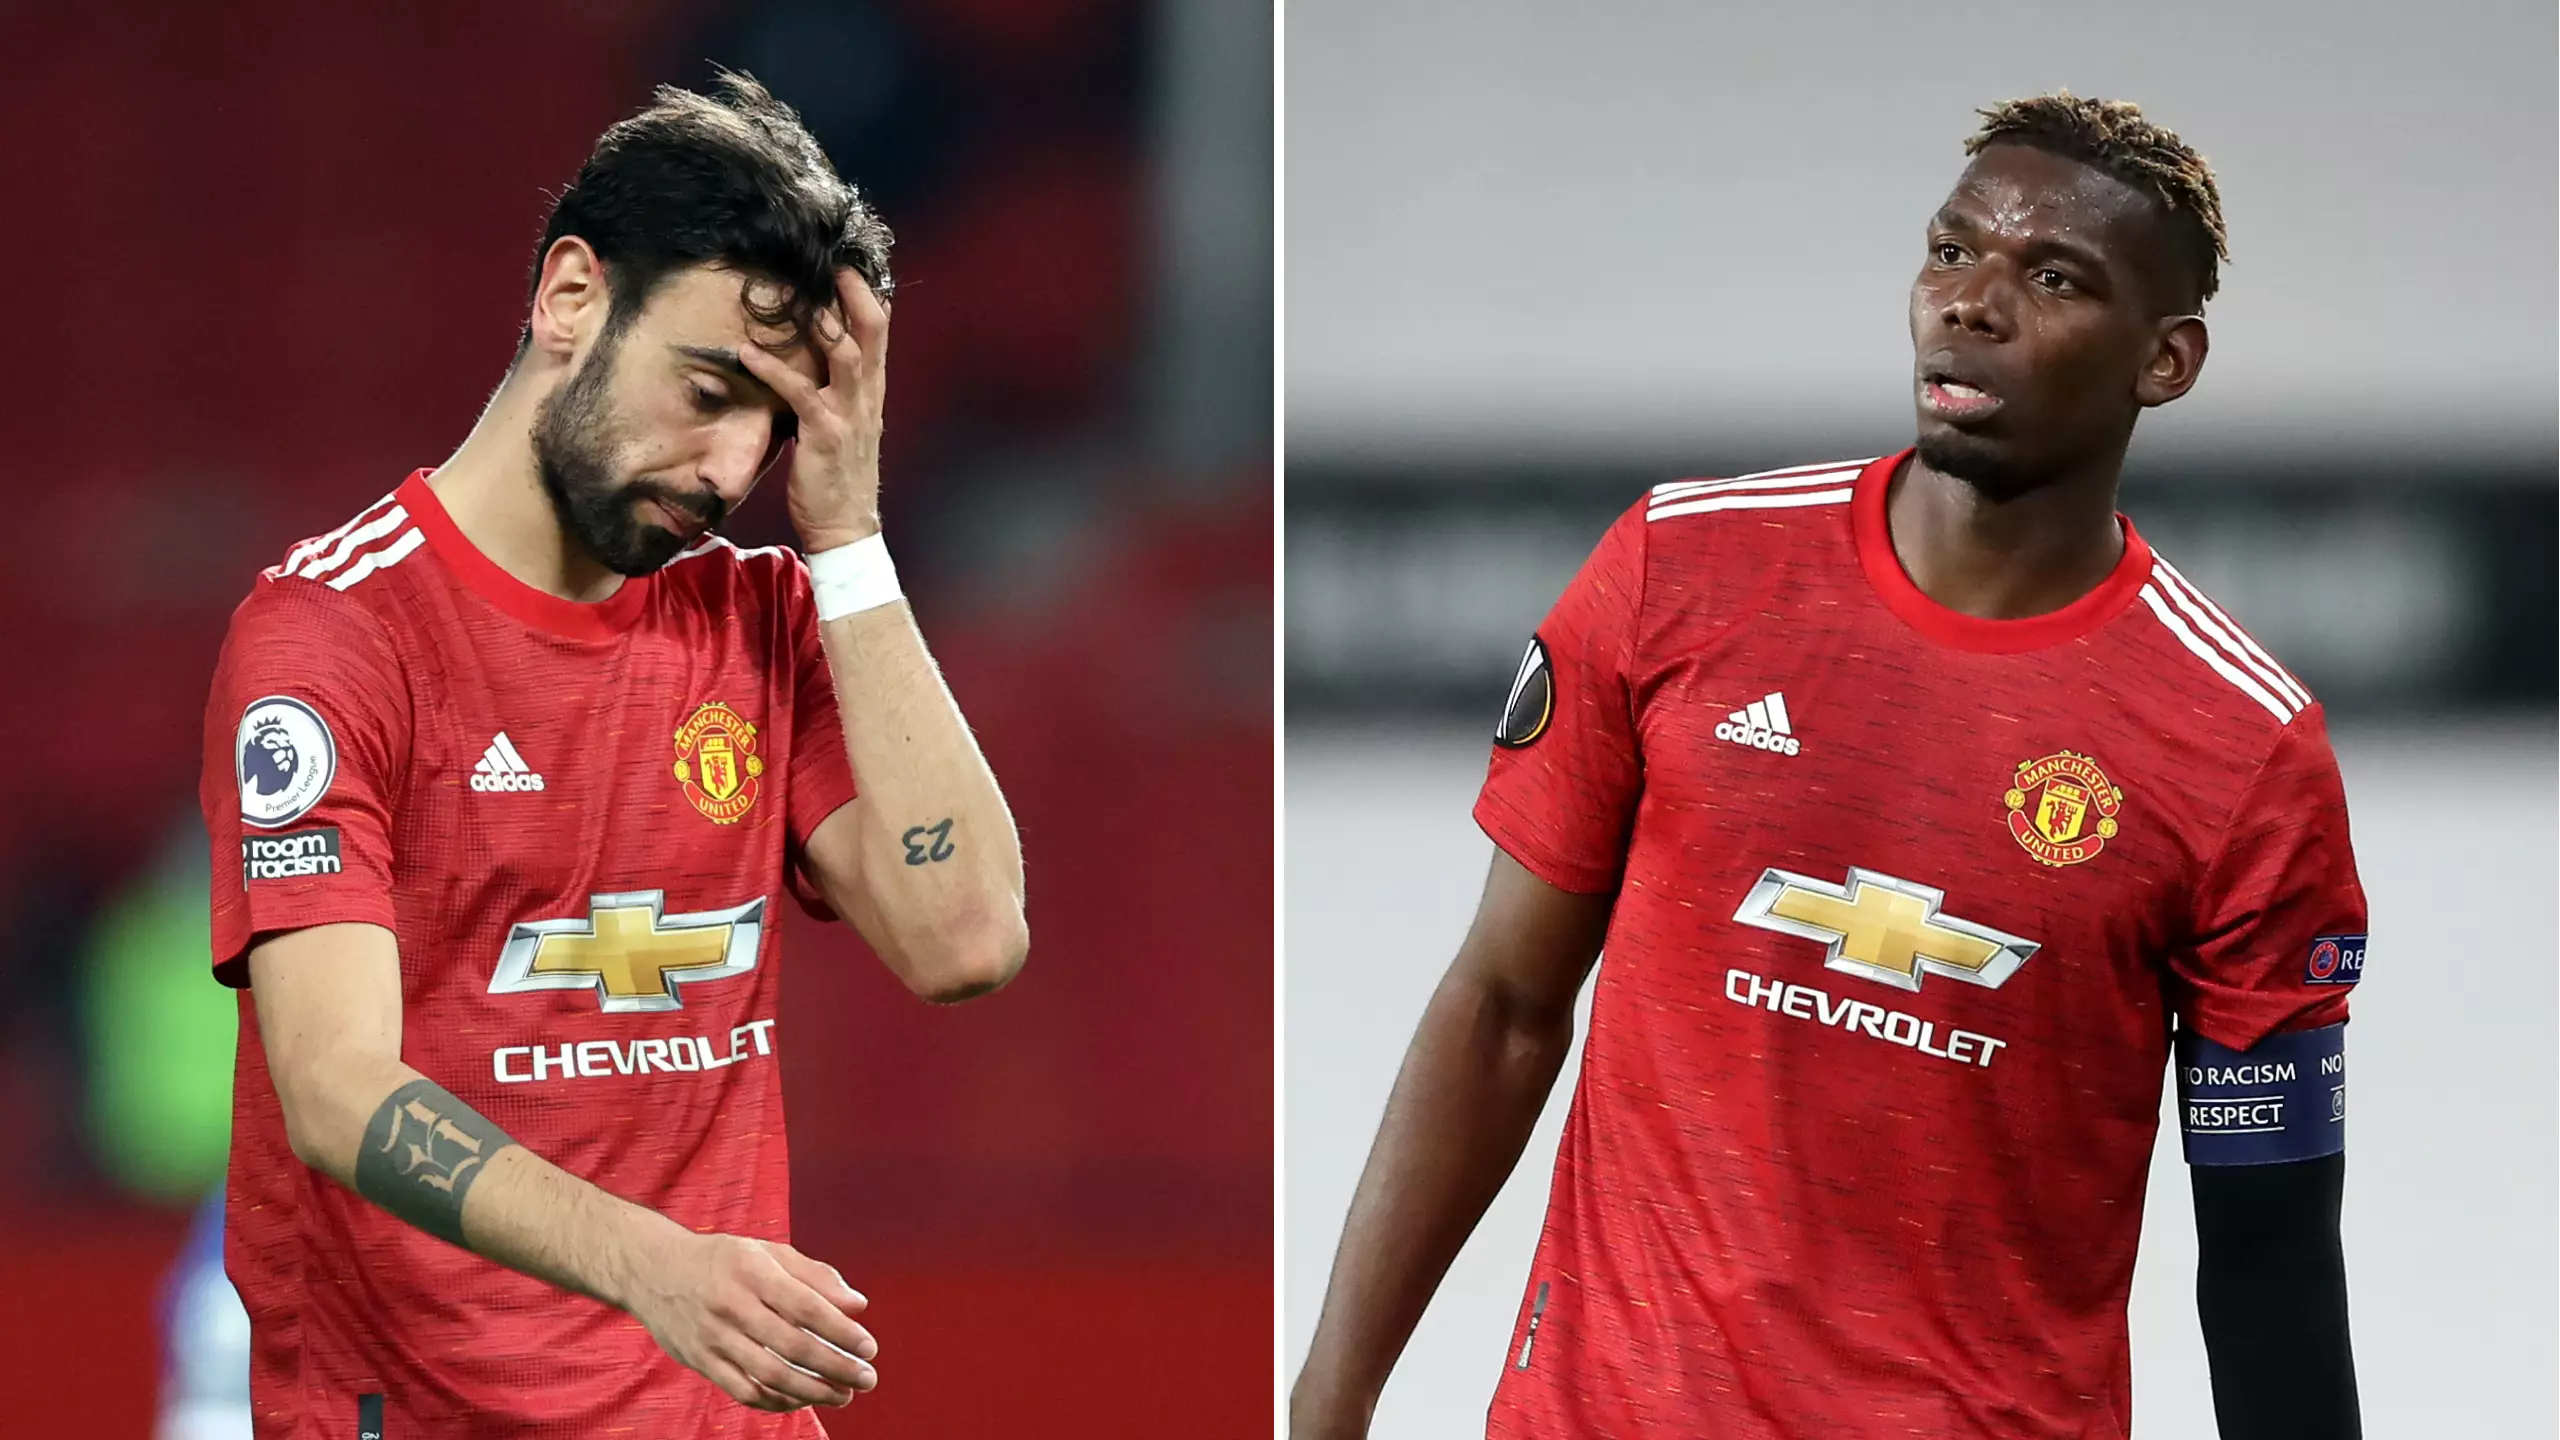 Bruno Fernandes 'Has One Paul Pogba Condition' Before Agreeing New Man Utd Contract